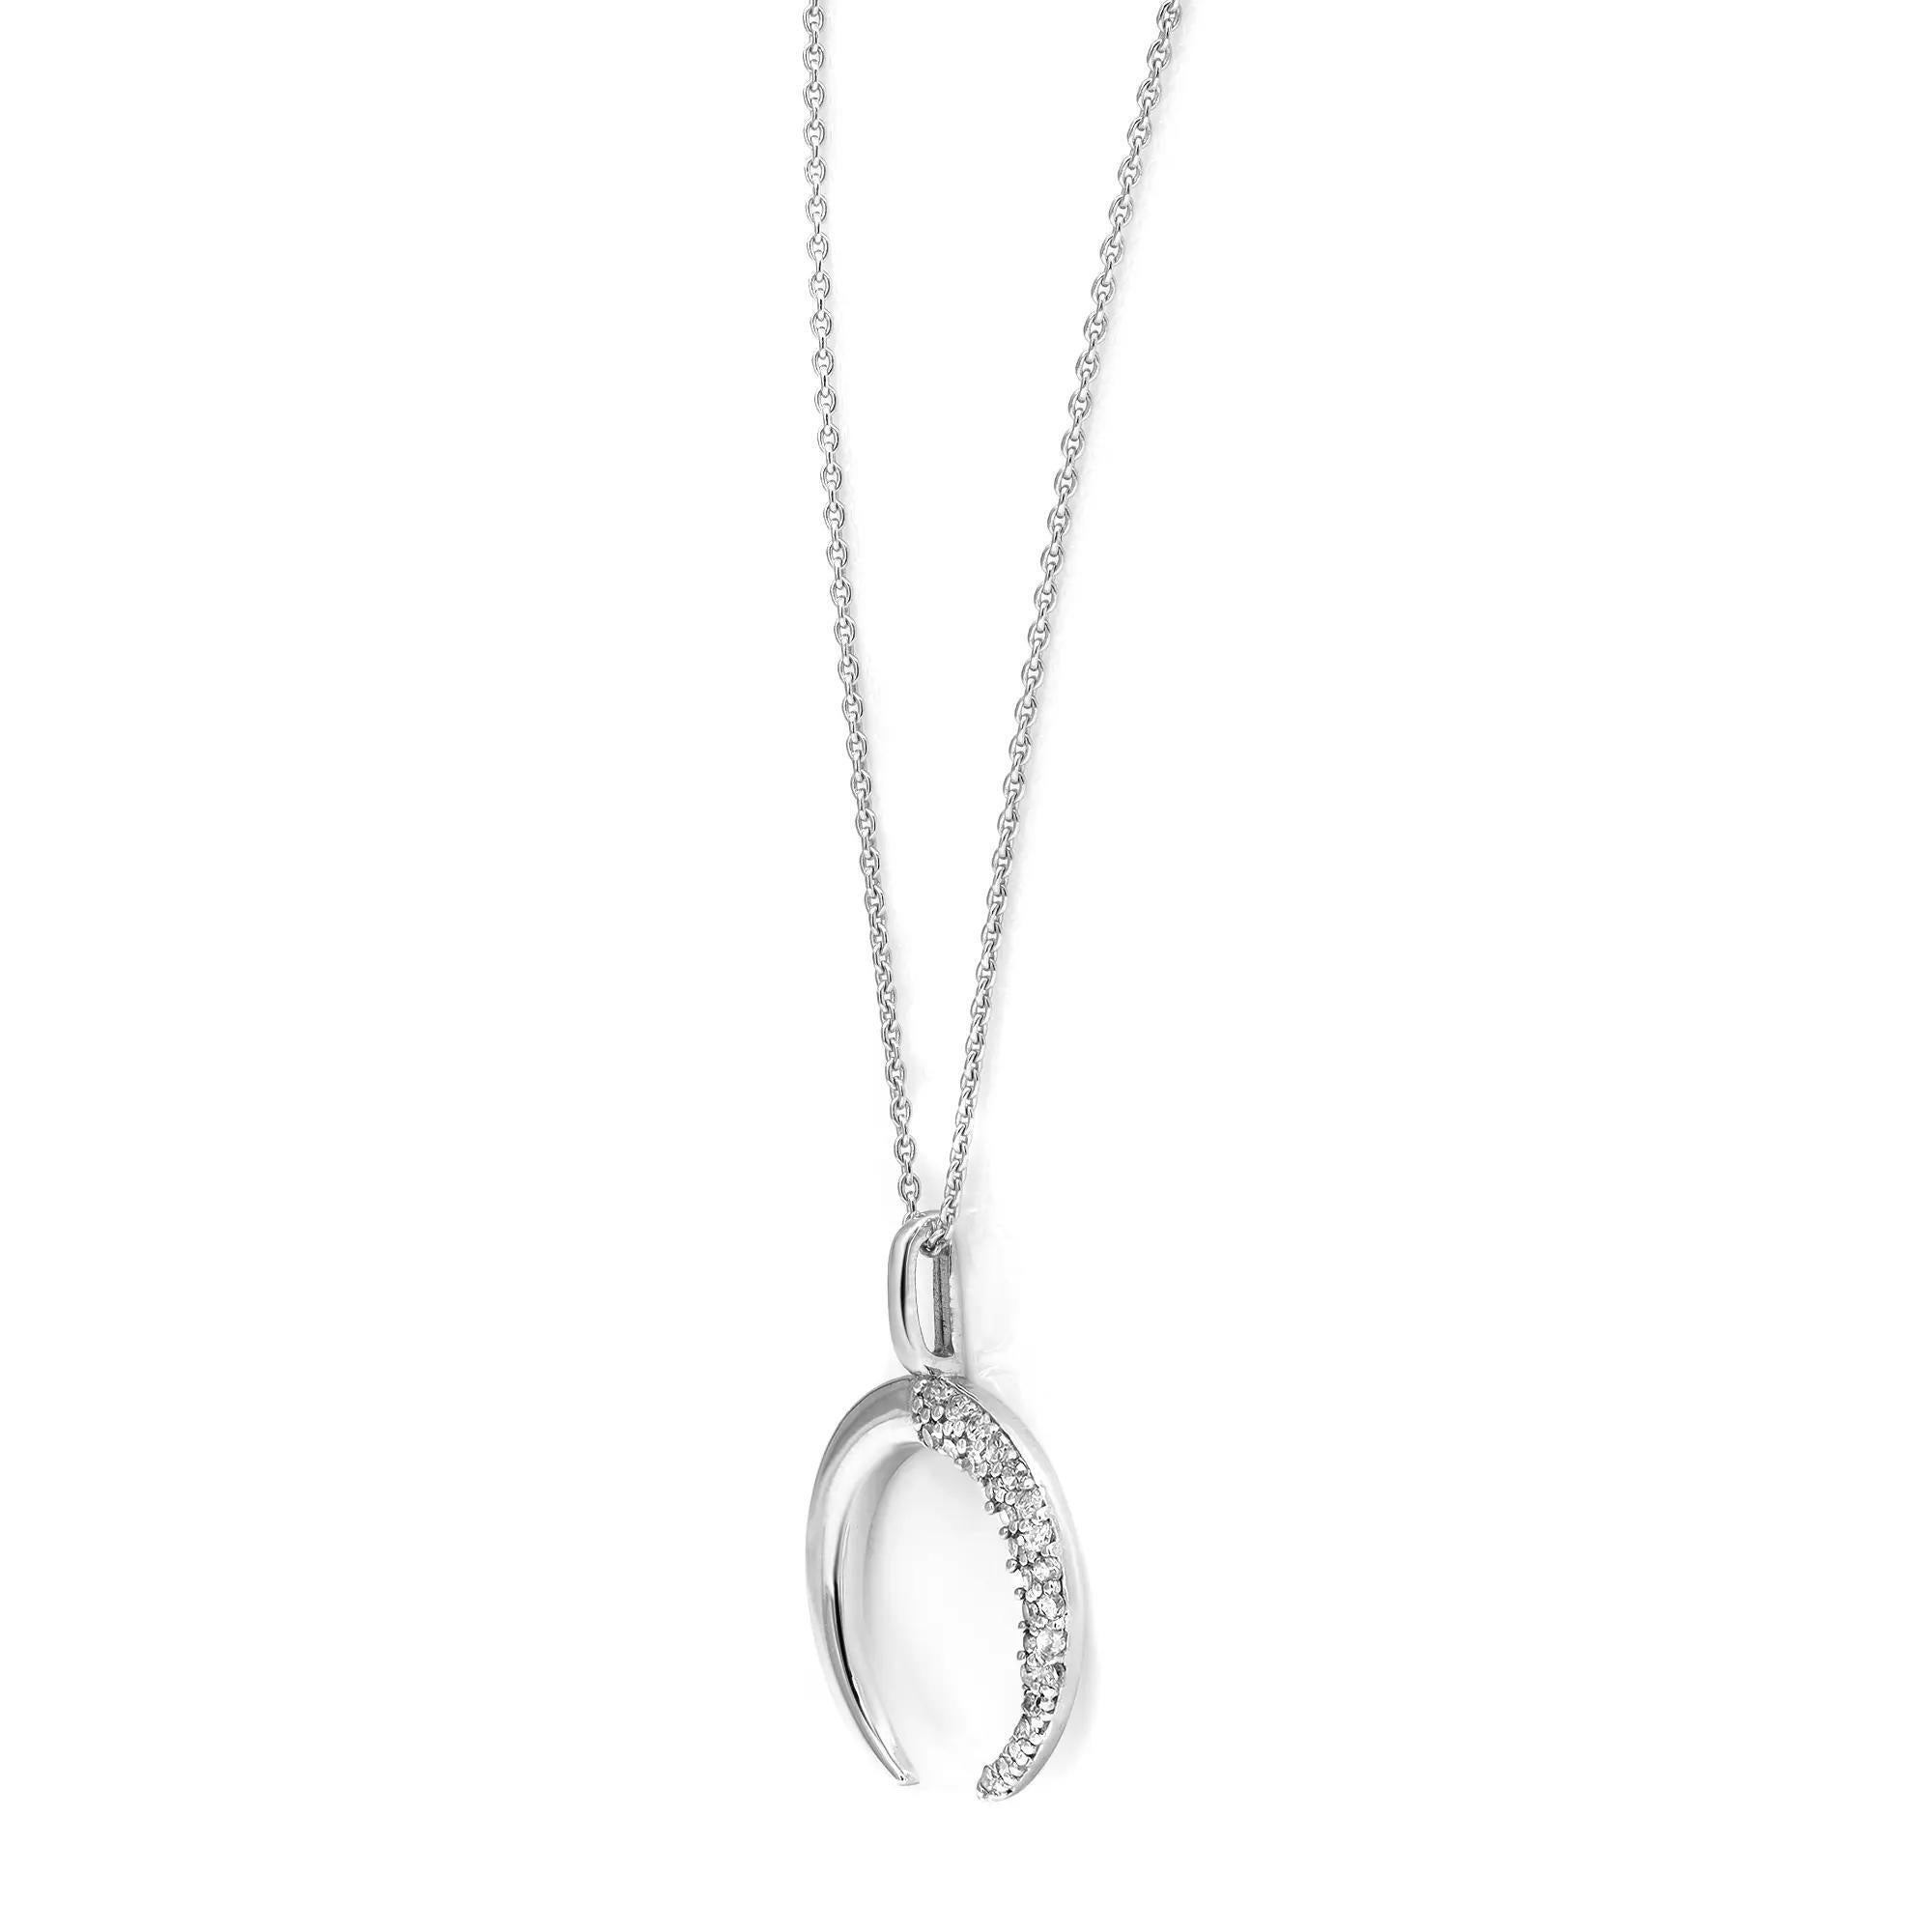 Modern Diamond Crescent Pendant Necklace Round Cut In 14K White Gold 0.10Cttw For Sale